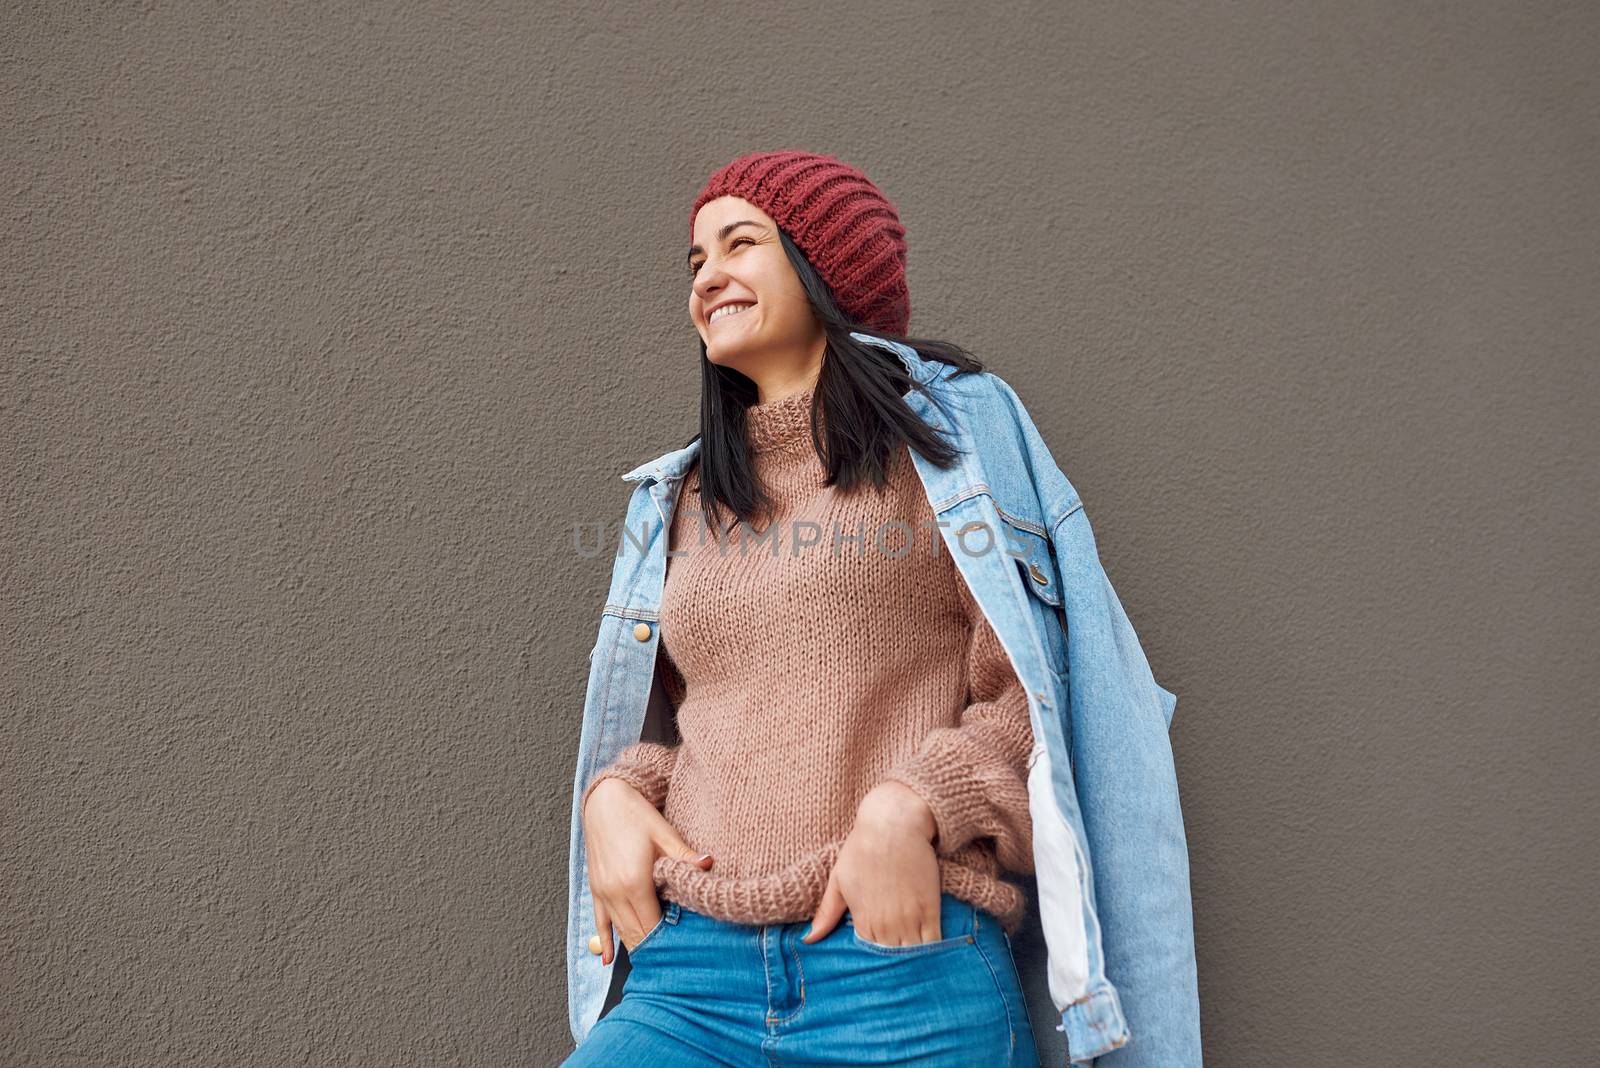 Cropped portrait of a joyful young woman in trendy casual clothing posing near the wall with her hands in pockets of jeans